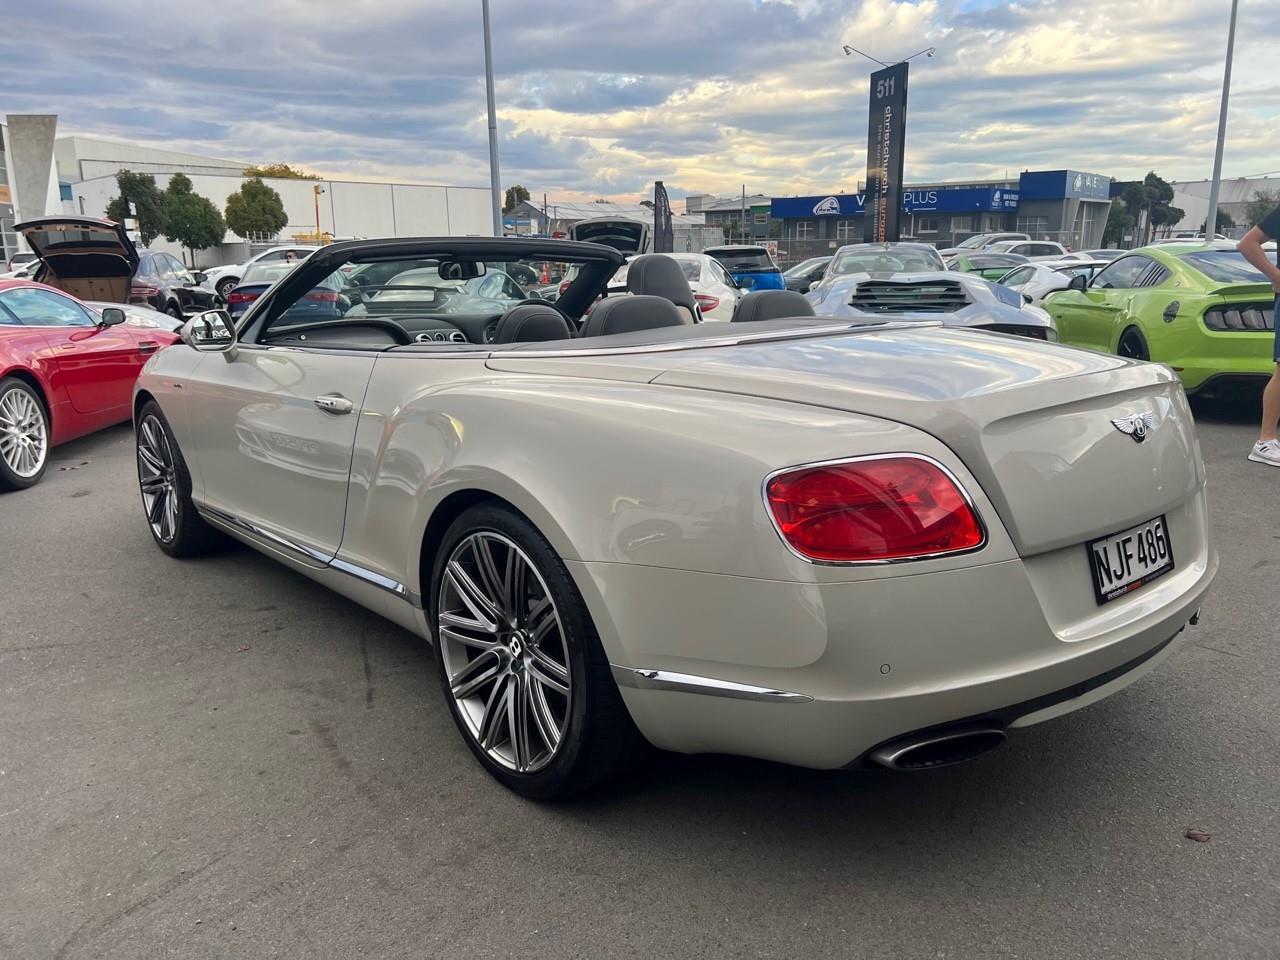 image-3, 2014 Bentley Continental GTC Speed Facelift Mullin at Christchurch